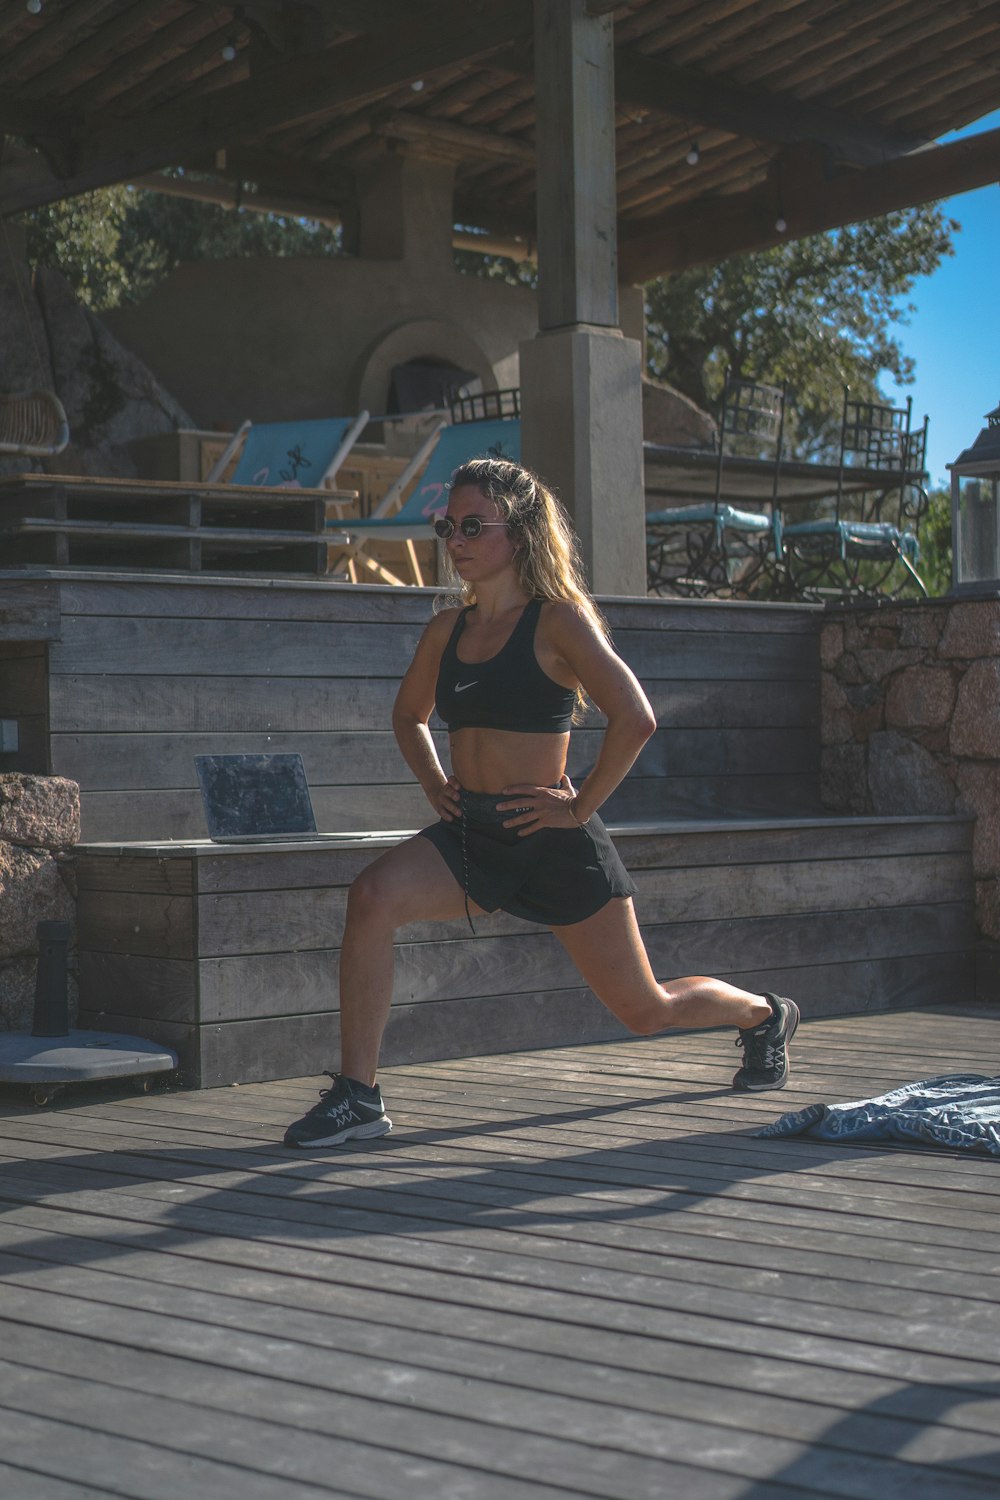 Woman in black sports bra and black shorts sitting on concrete